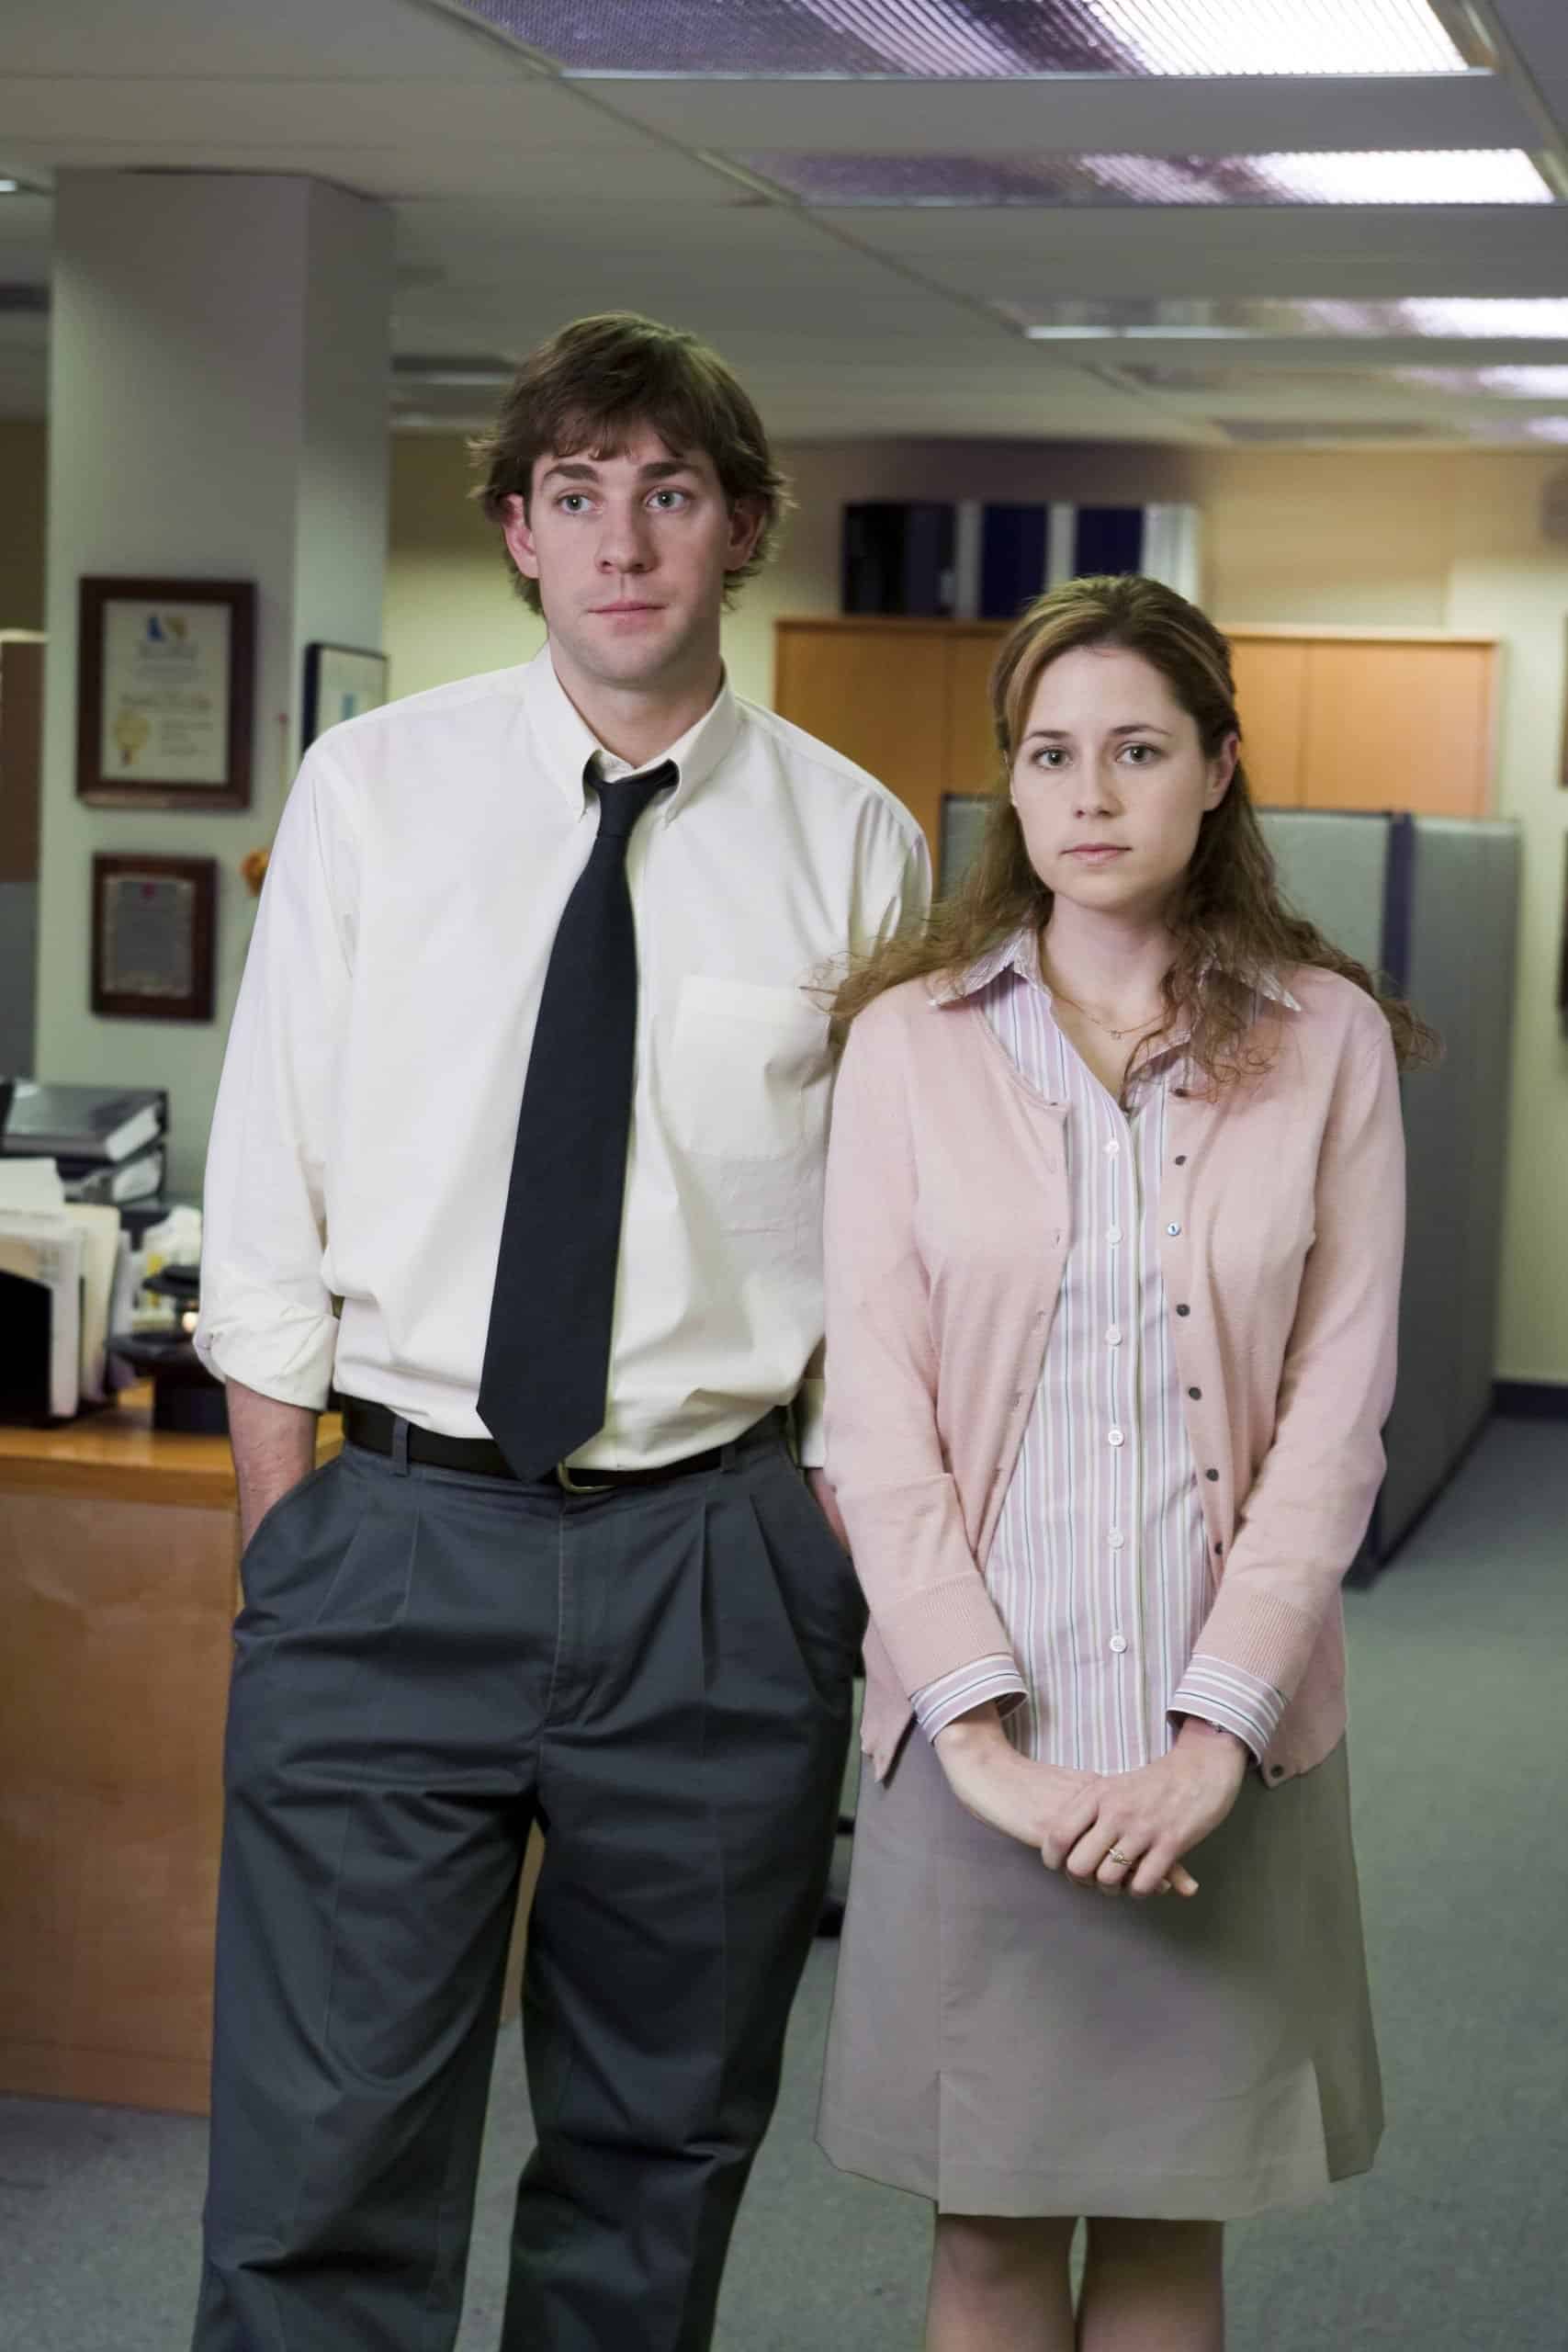 Jim and Pam on the show, The Office